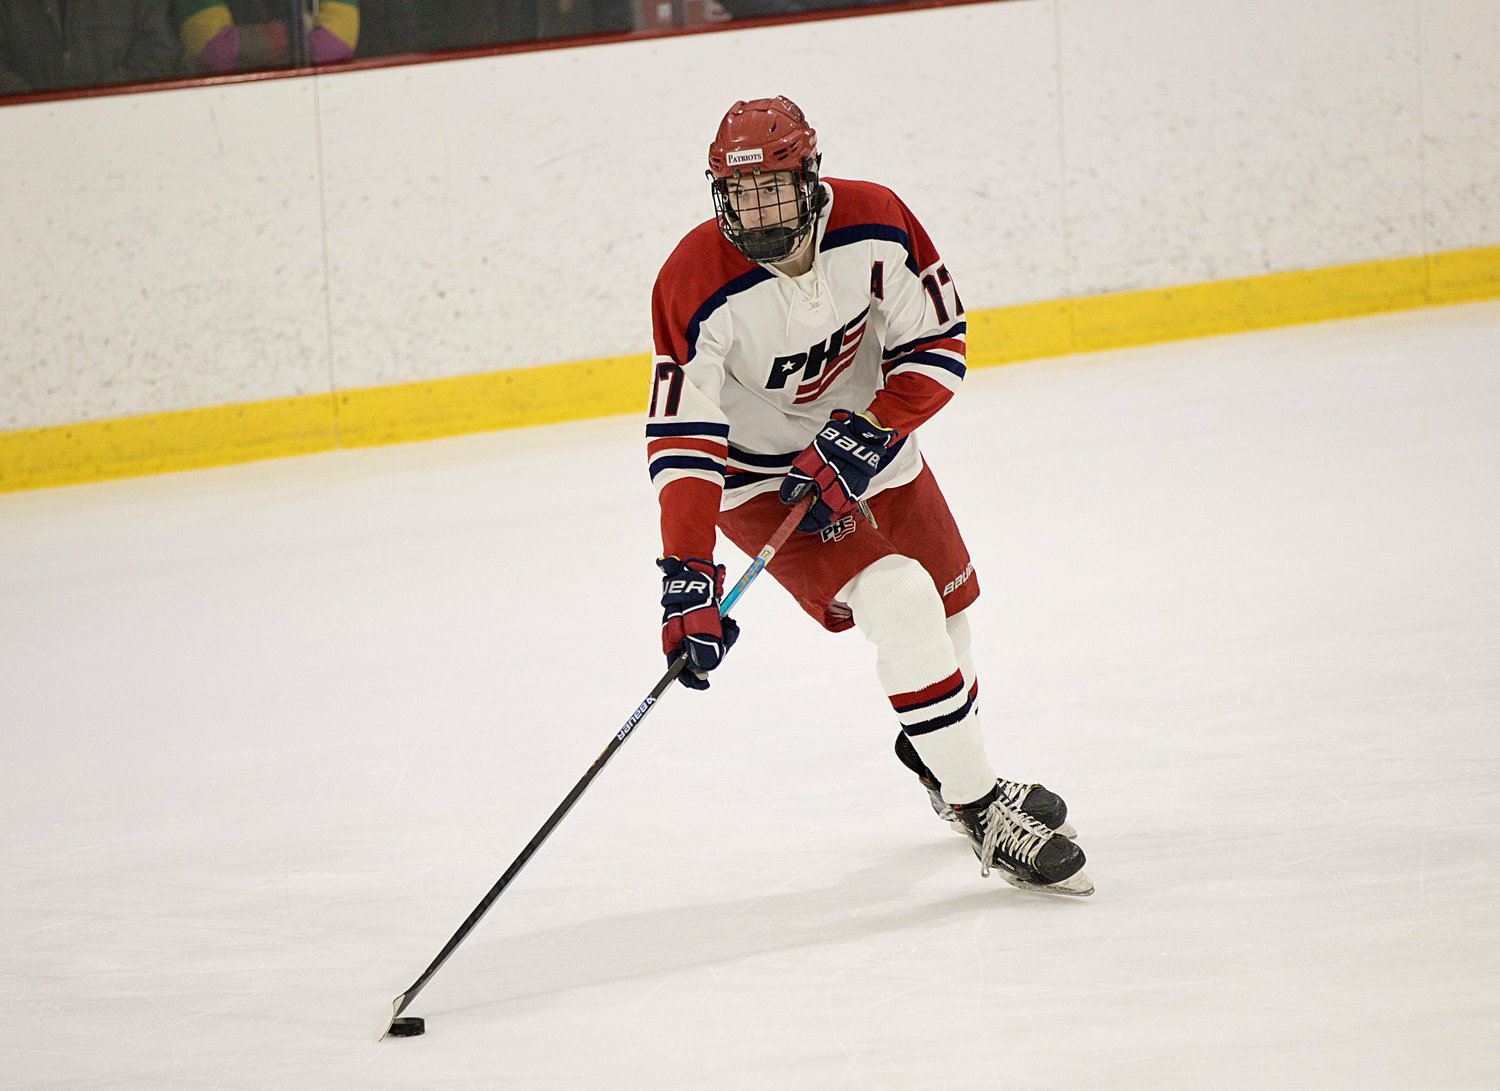 Dan Biello scans the ice for an open teammate while holding the puck for the Patriots.